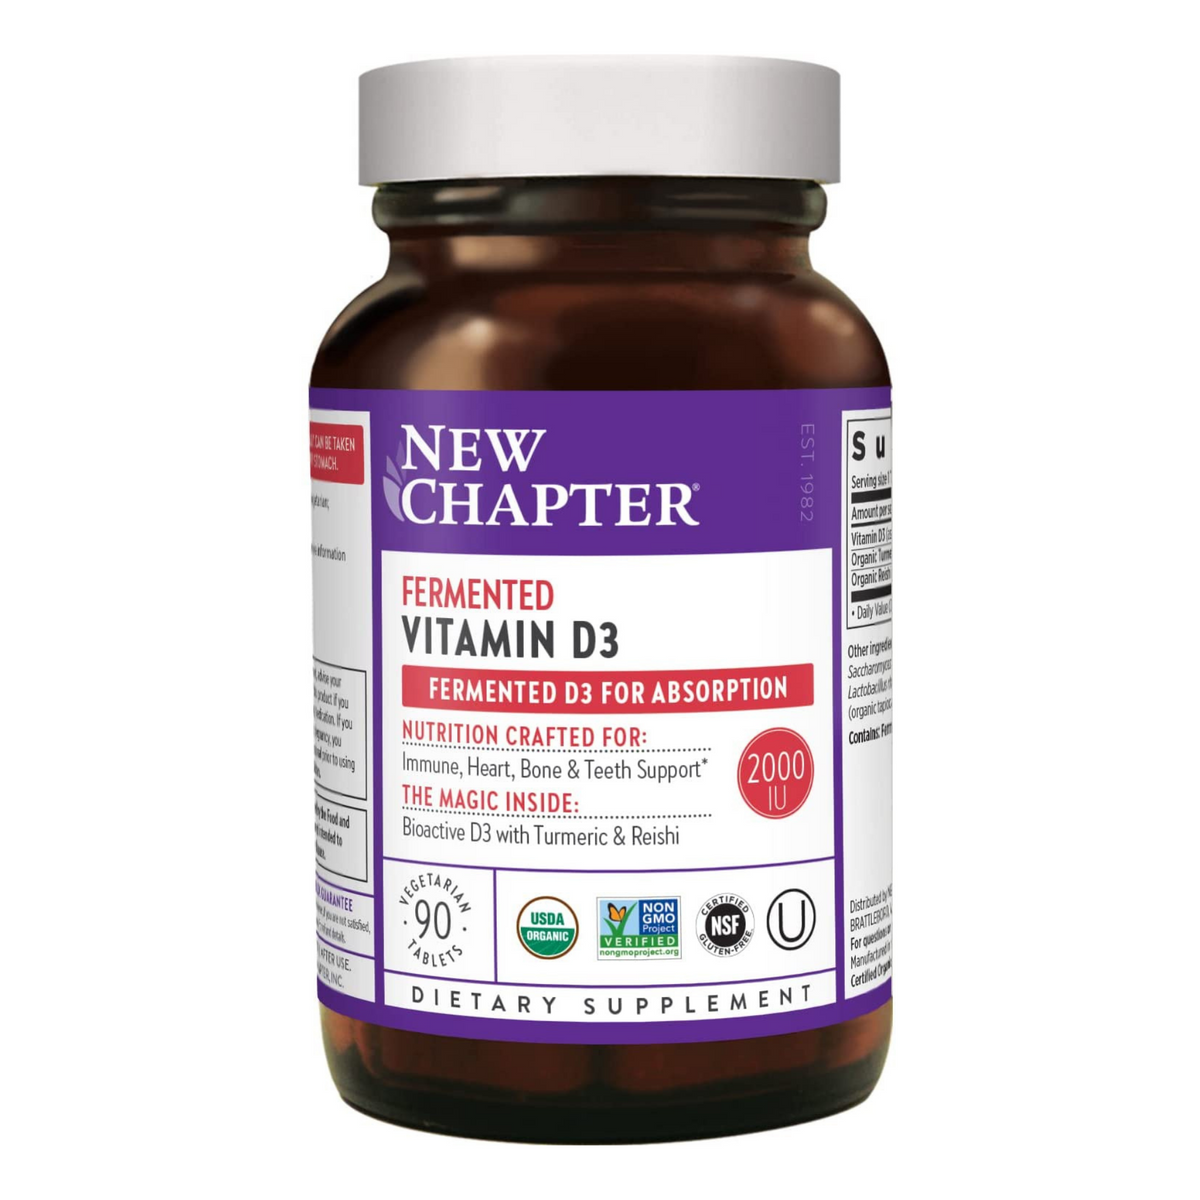 Primary Image of Fermented Vitamin D3 Tablets